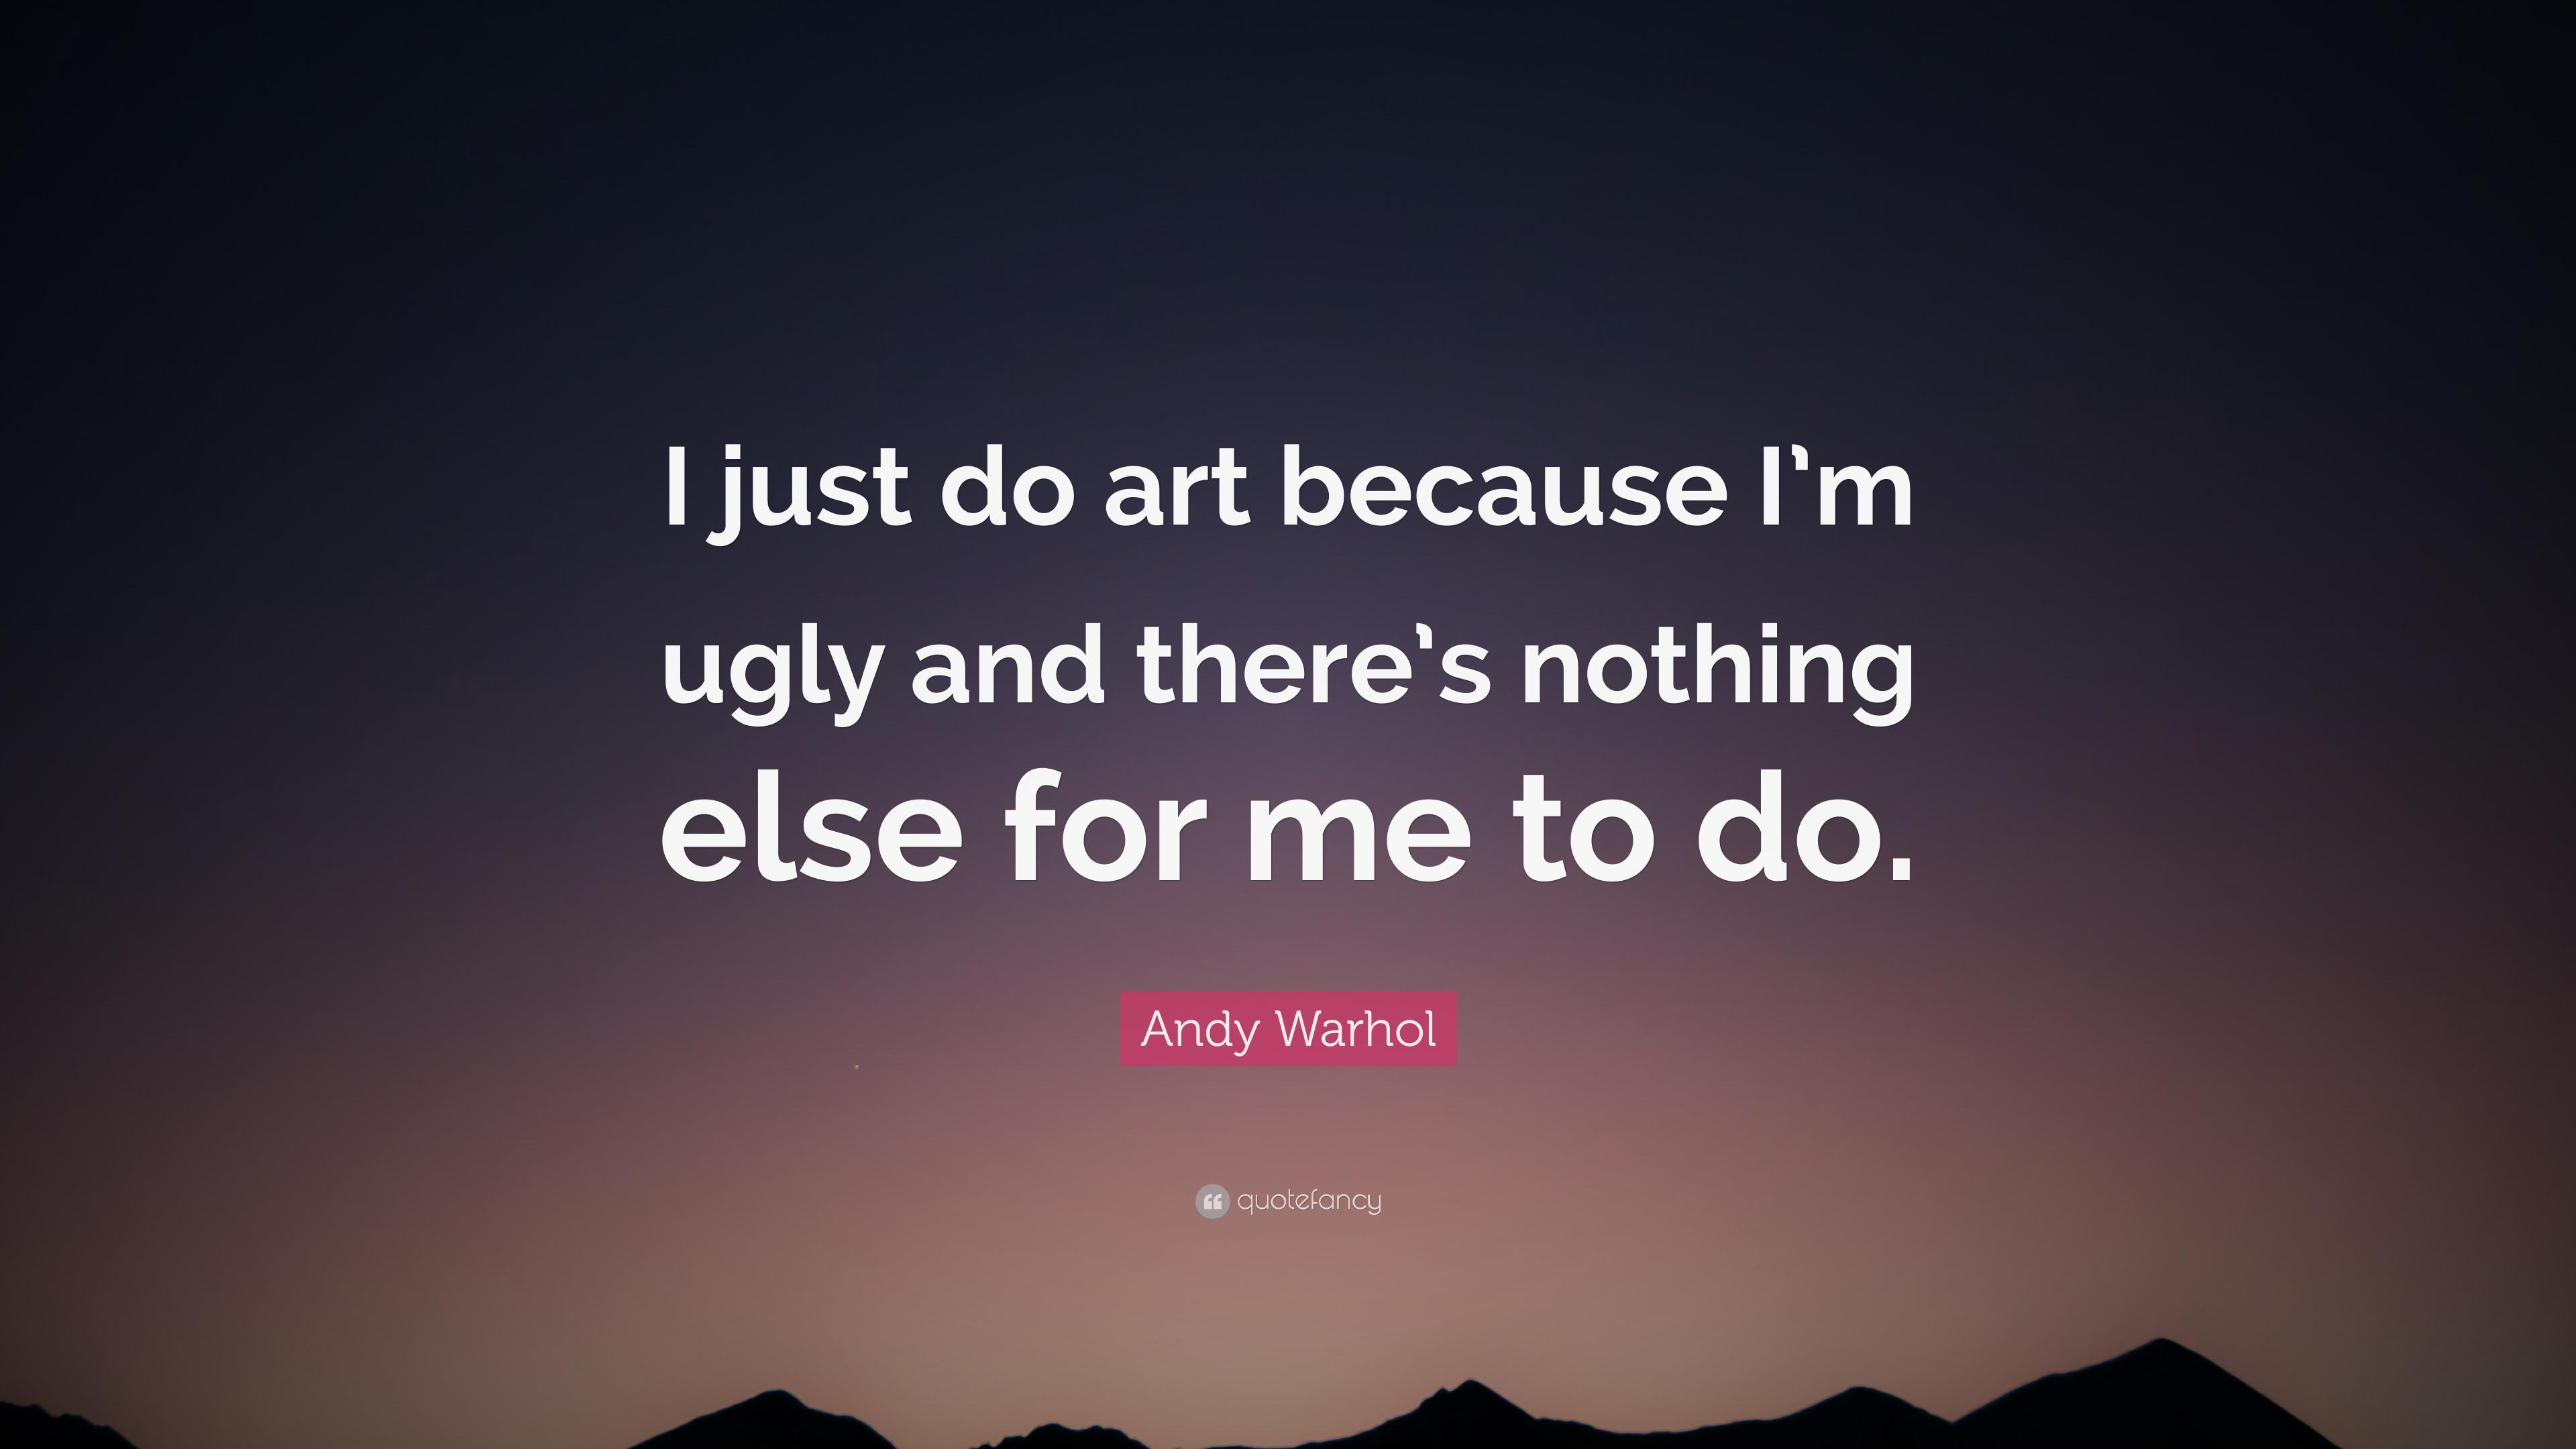 Andy Warhol Quote: “I just do art because I'm ugly